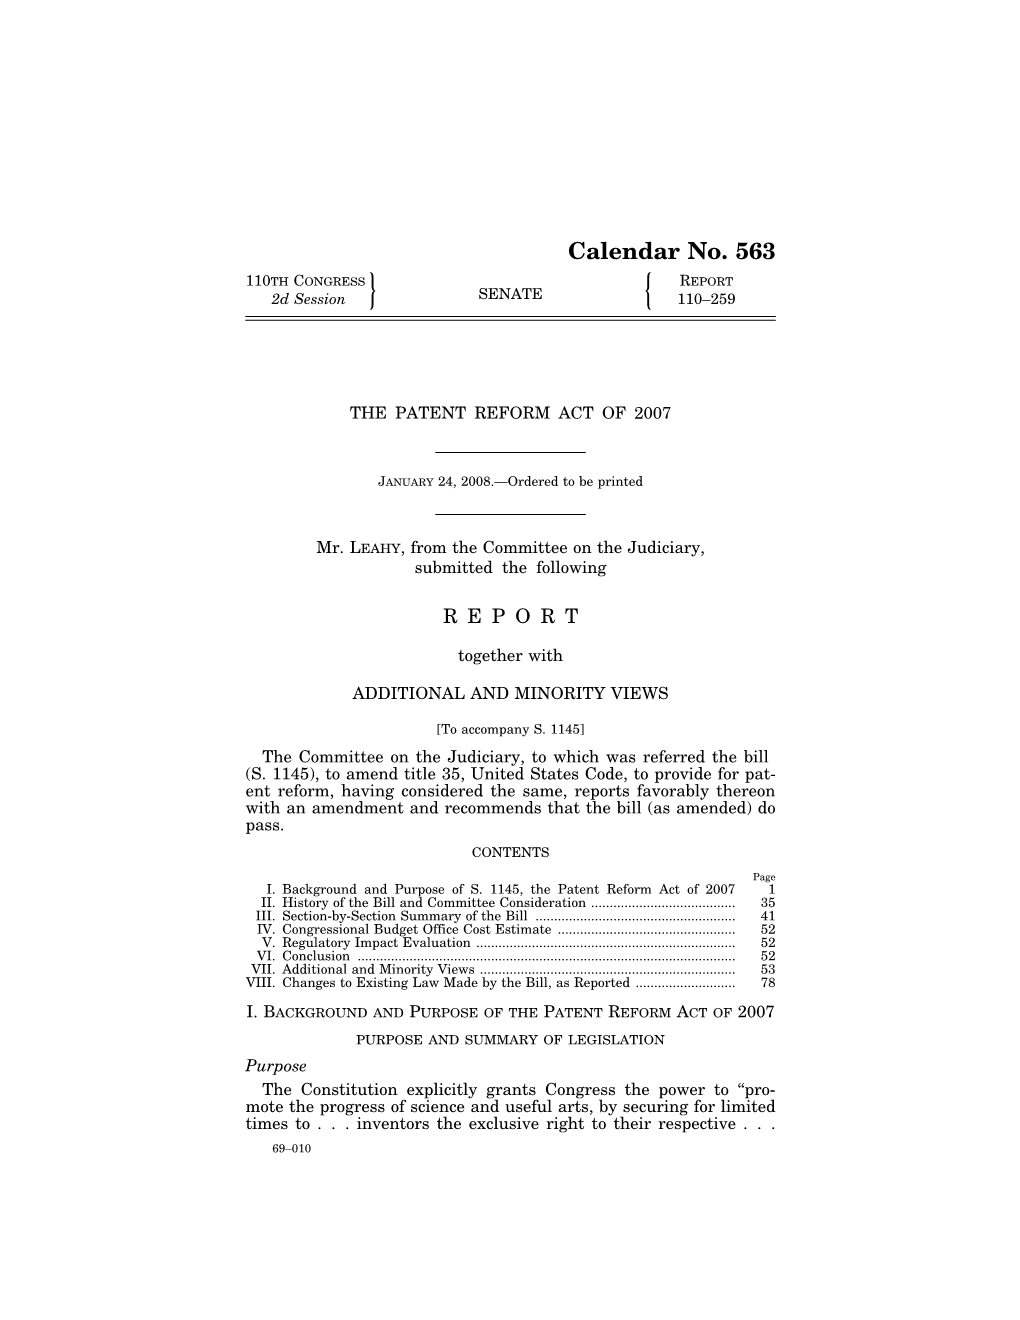 Patent Reform Act of 2007